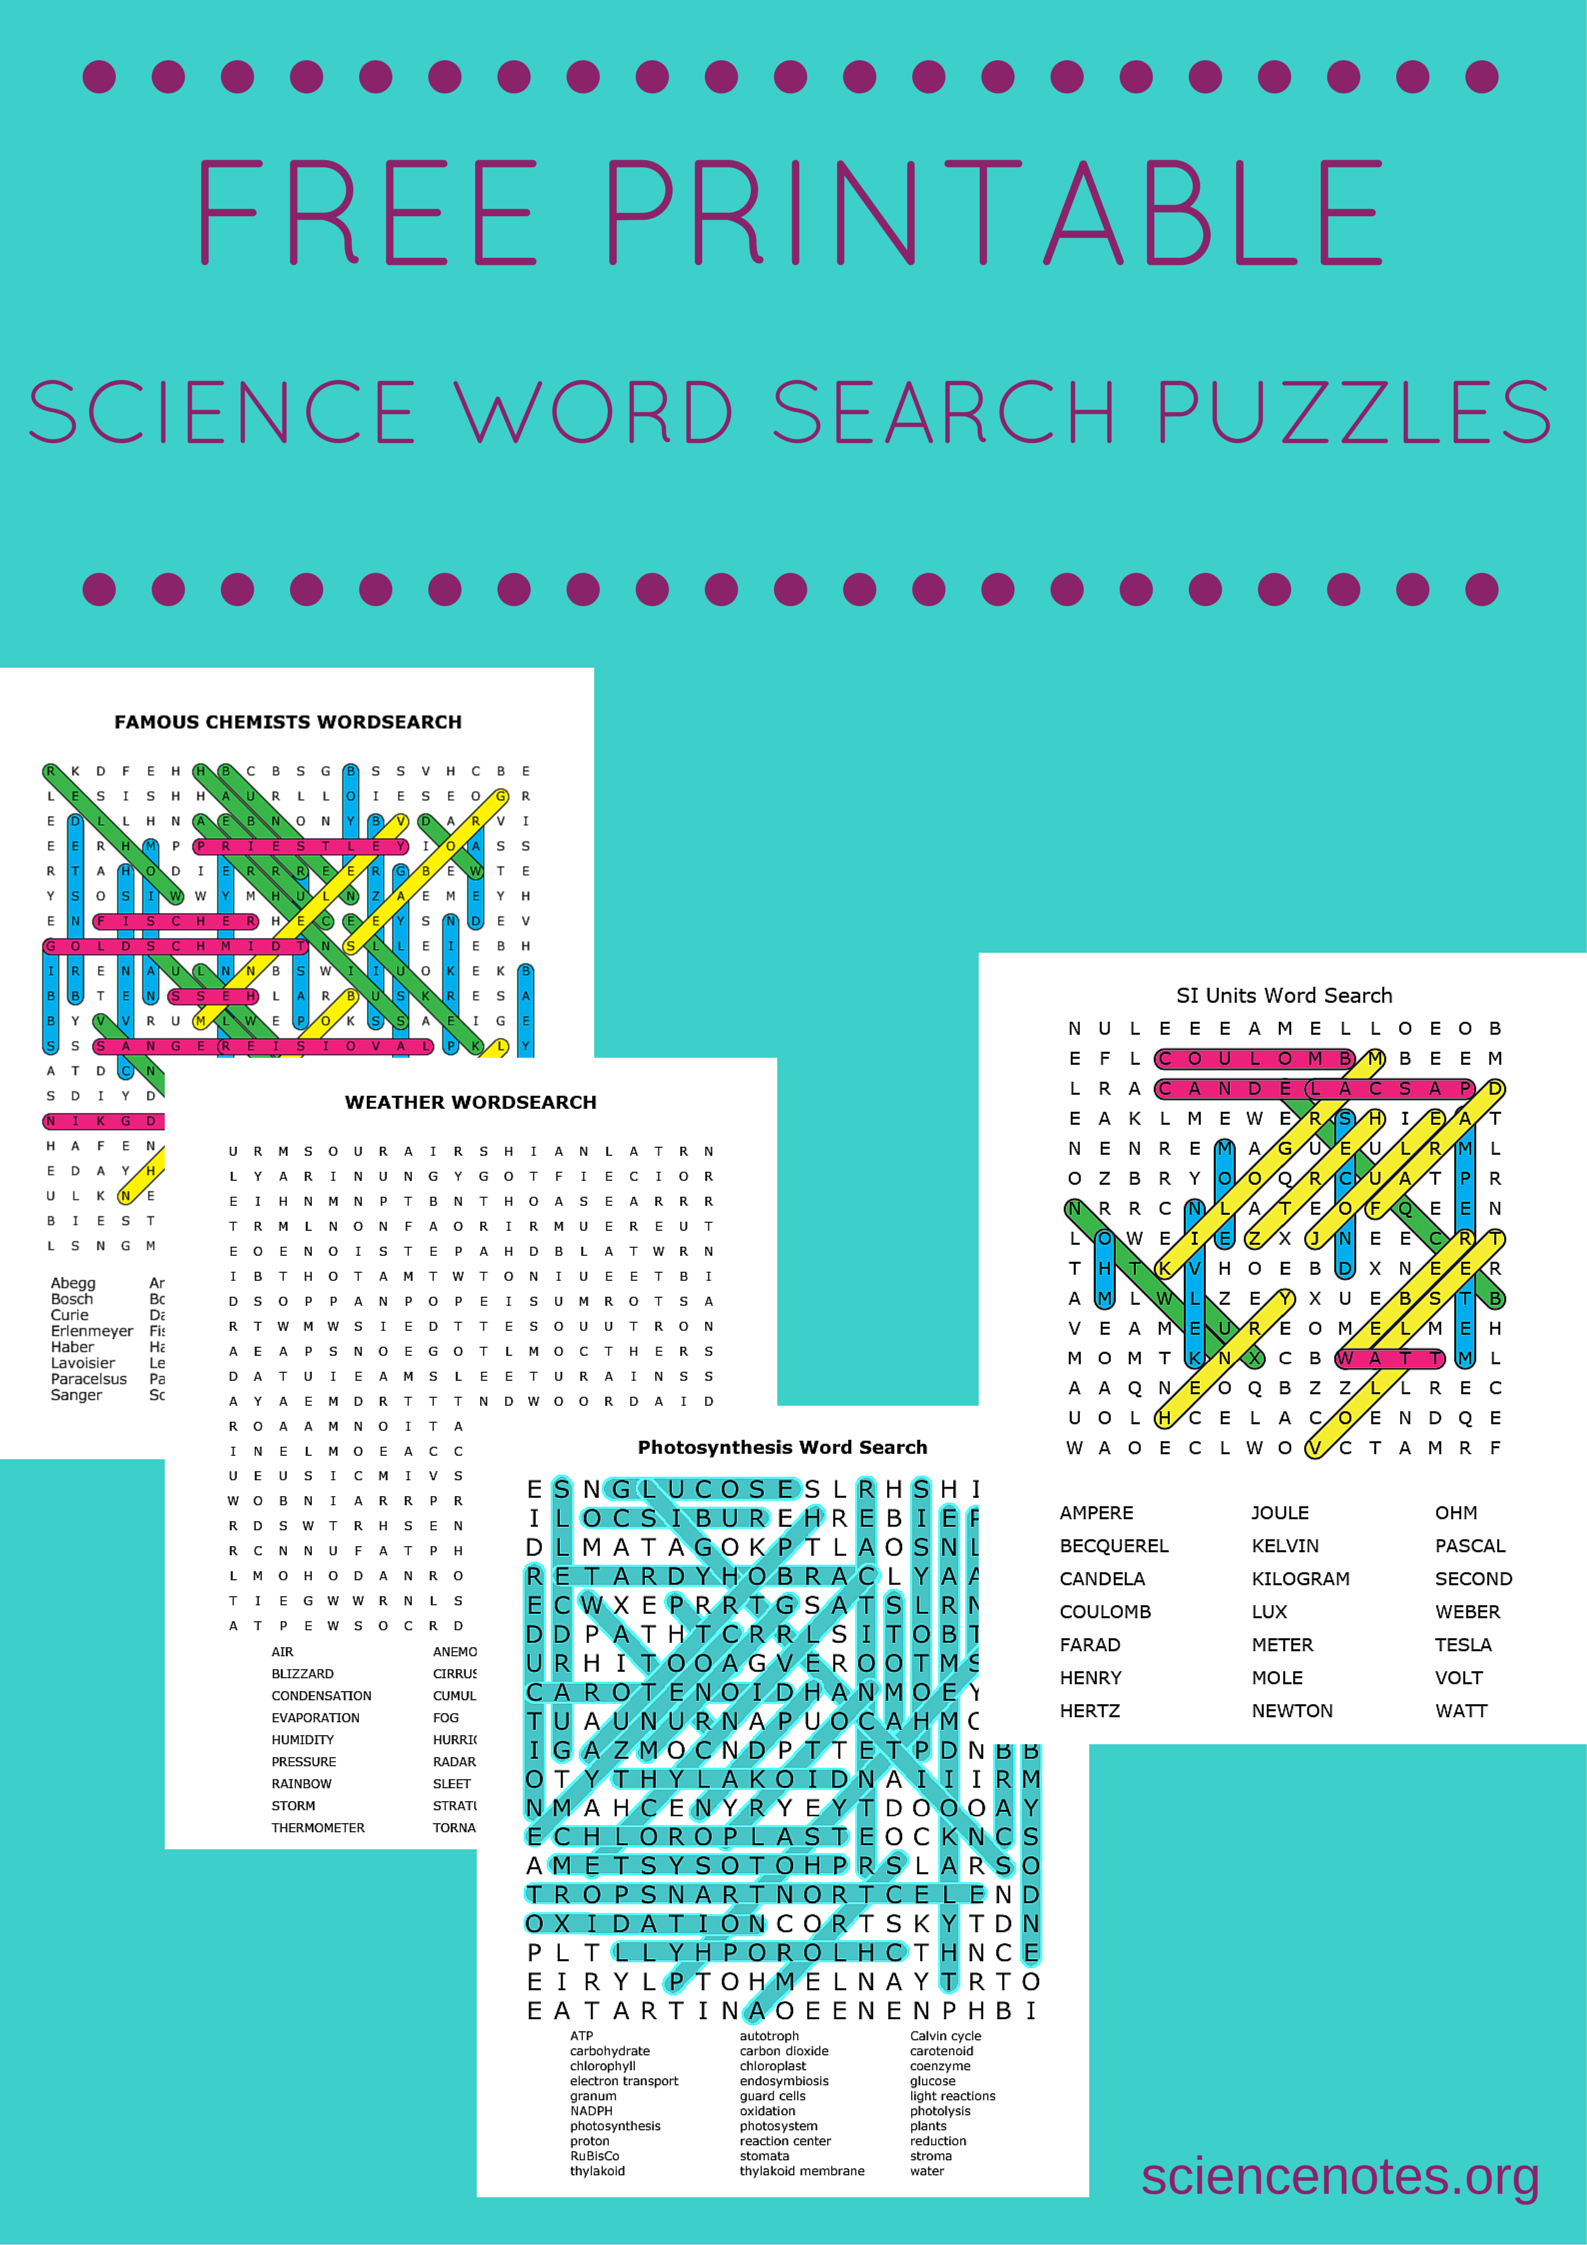 Free Printable Science Word Search Puzzles - Printable Science Puzzles